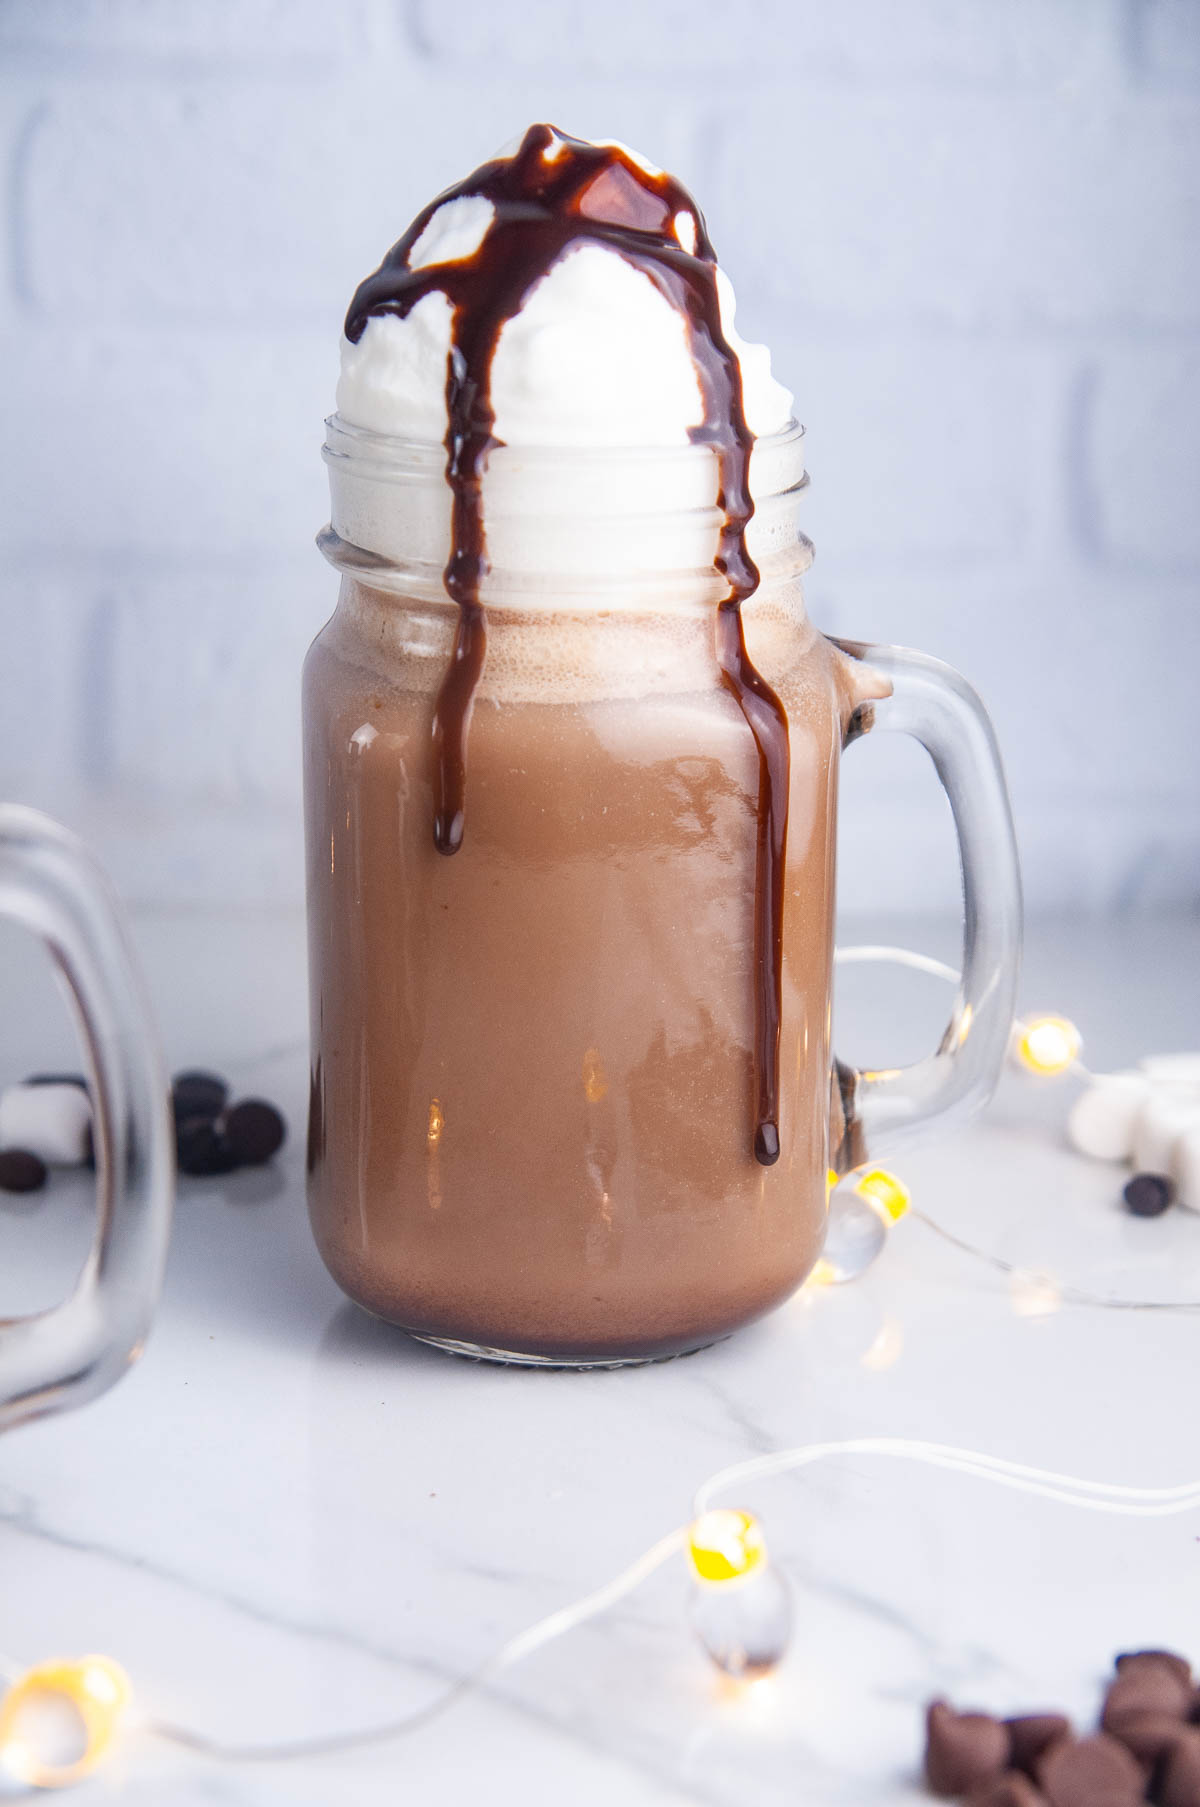 Easy Hot Chocolate Coffee is a coffee shop style warm drink you can make and enjoy right at home!